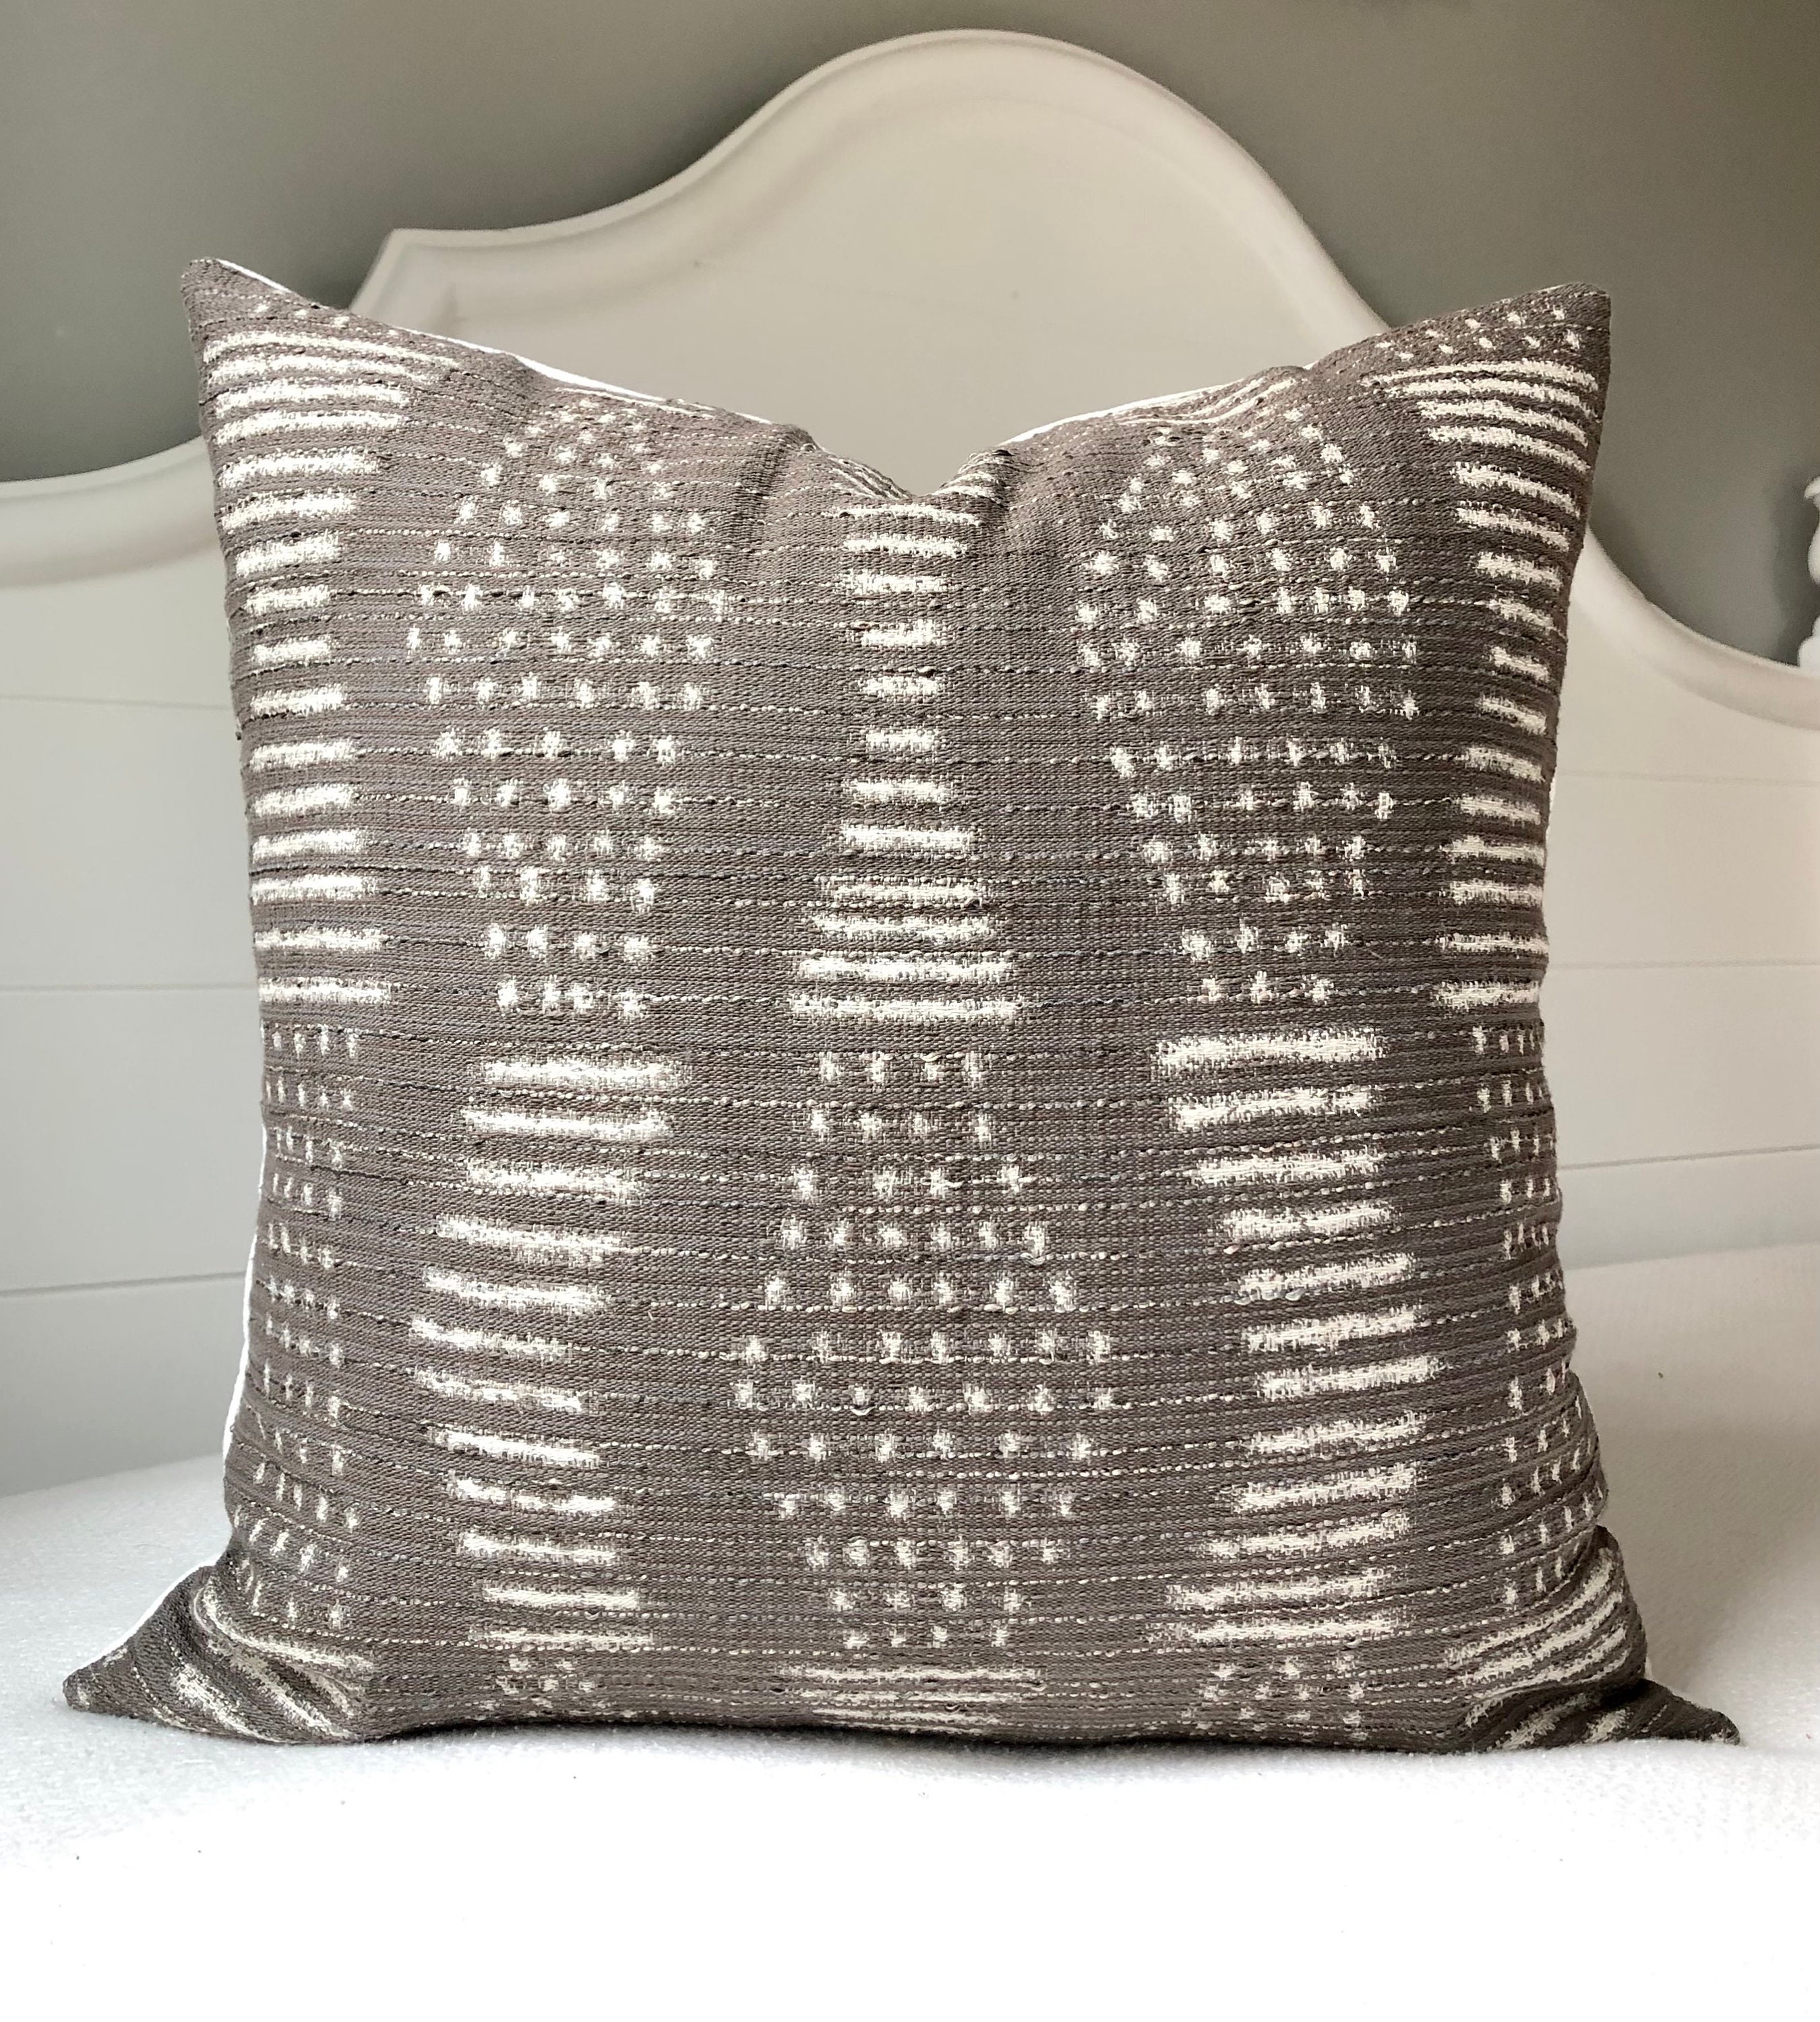 GIGIZAZA Decorative Taupe Throw Pillow Covers 20 x 20,Sofa Thick Silver  Stripe Cushion Pillow Covers,Square Brown Luxury Pillows 2 Set